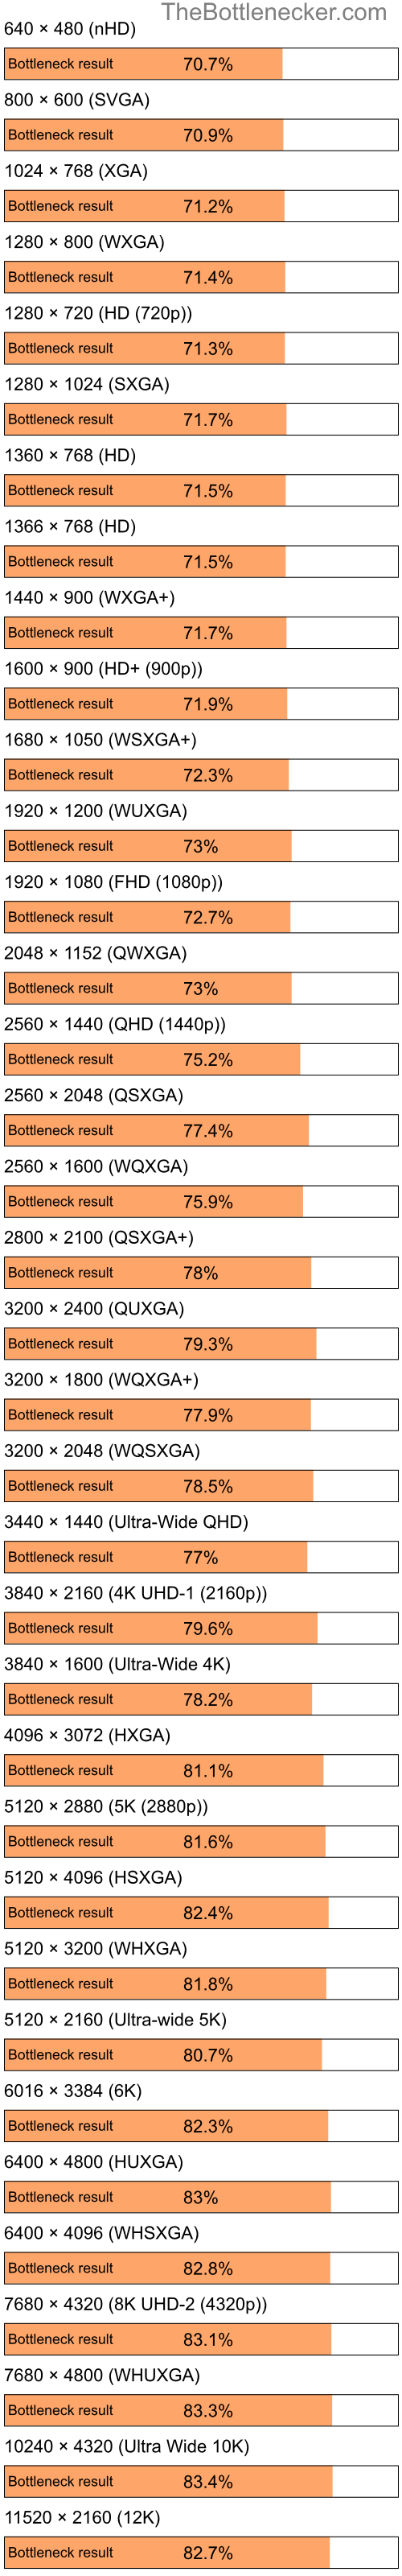 Bottleneck results by resolution for Intel Atom Z520 and AMD Mobility Radeon HD 4200 in Graphic Card Intense Tasks